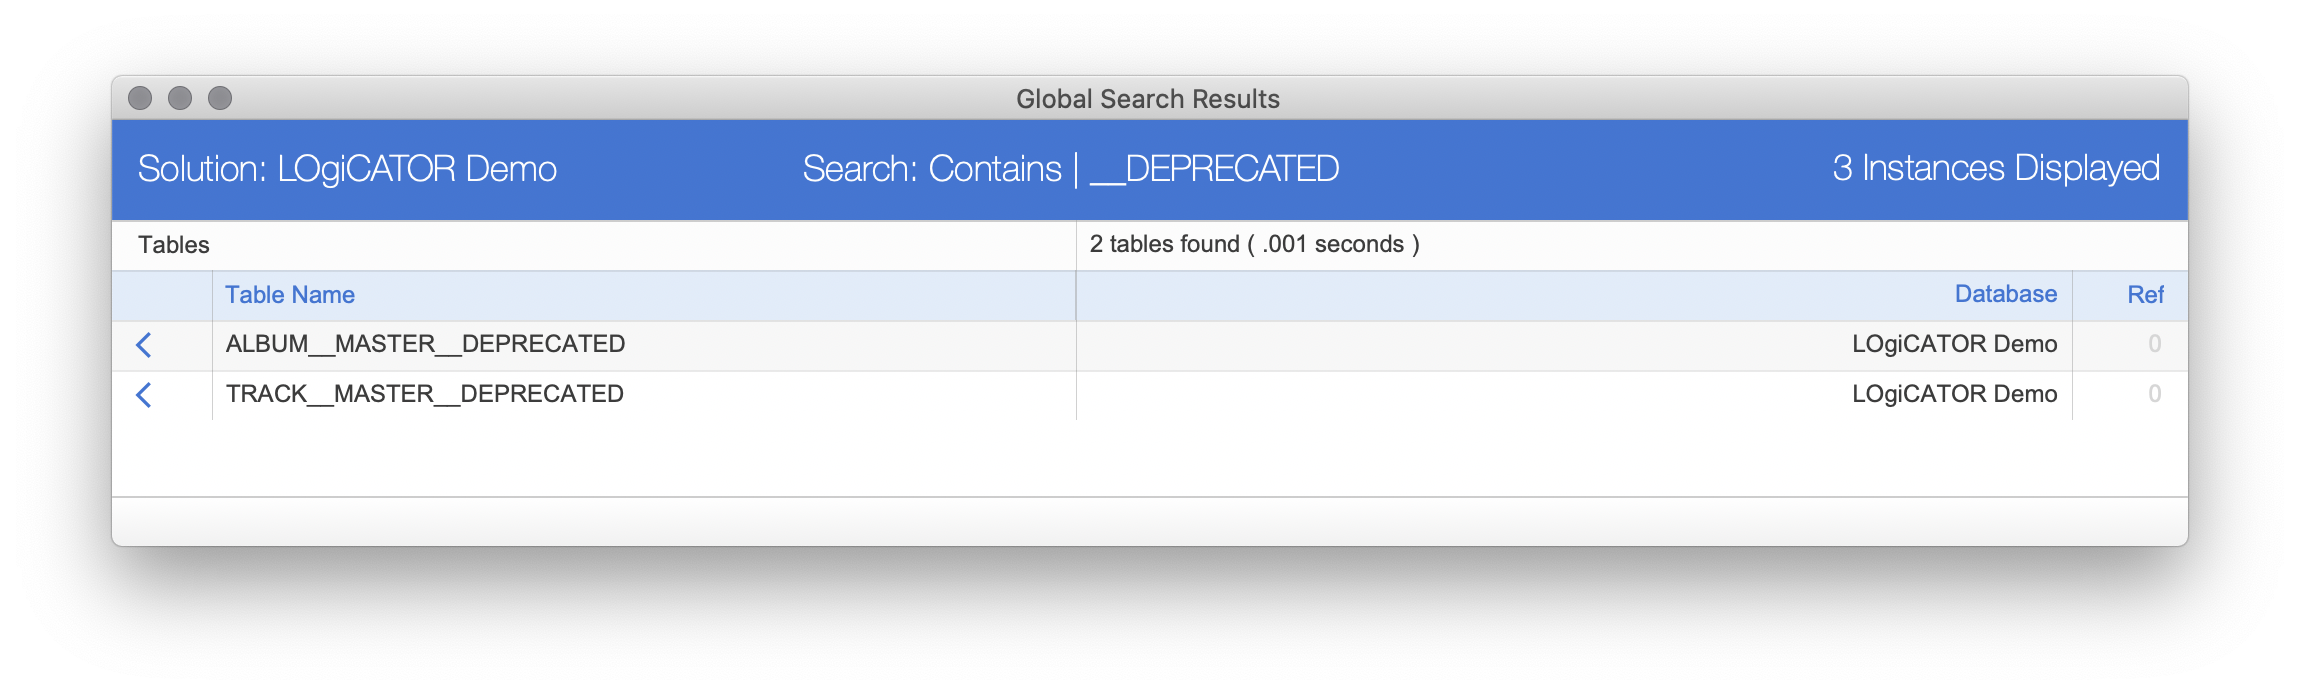 InspectorPro 7 Global Search Results